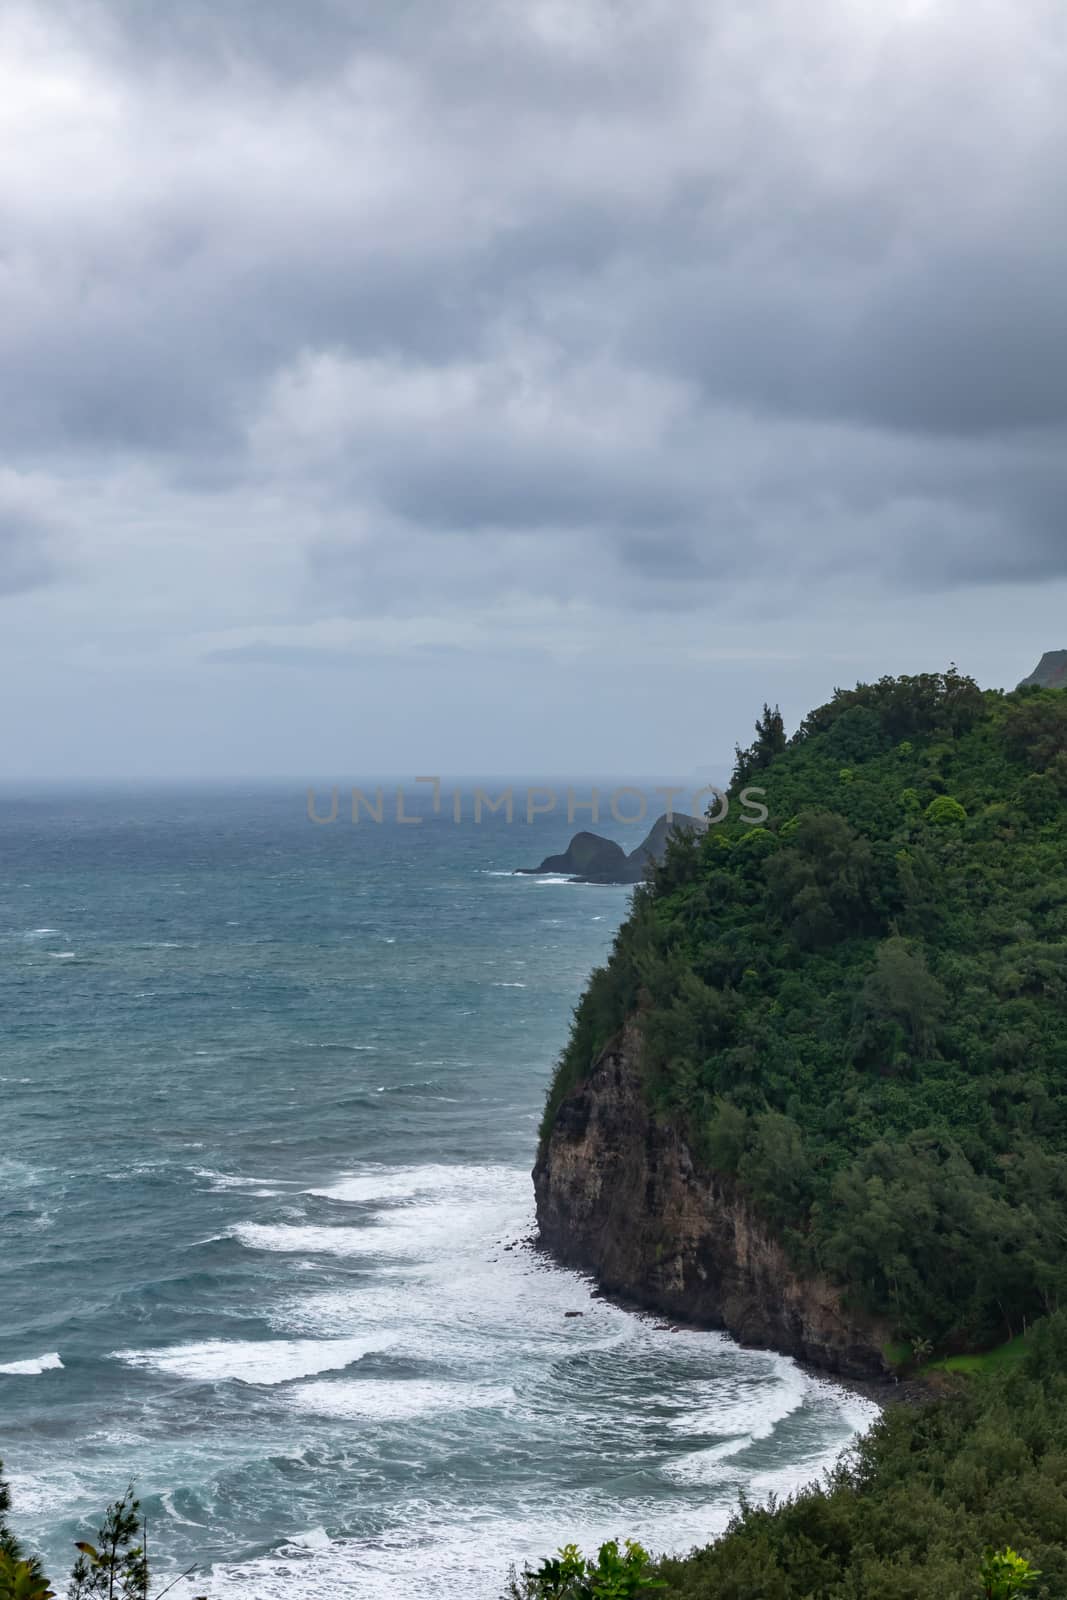 Kohala, Hawaii, USA. - January 15, 2020: Portrait of Coastline where Pololu valley and its beach meets the ocean. Big rocks, tall steep cliffs, green forests under heavy blueish cloudscape.